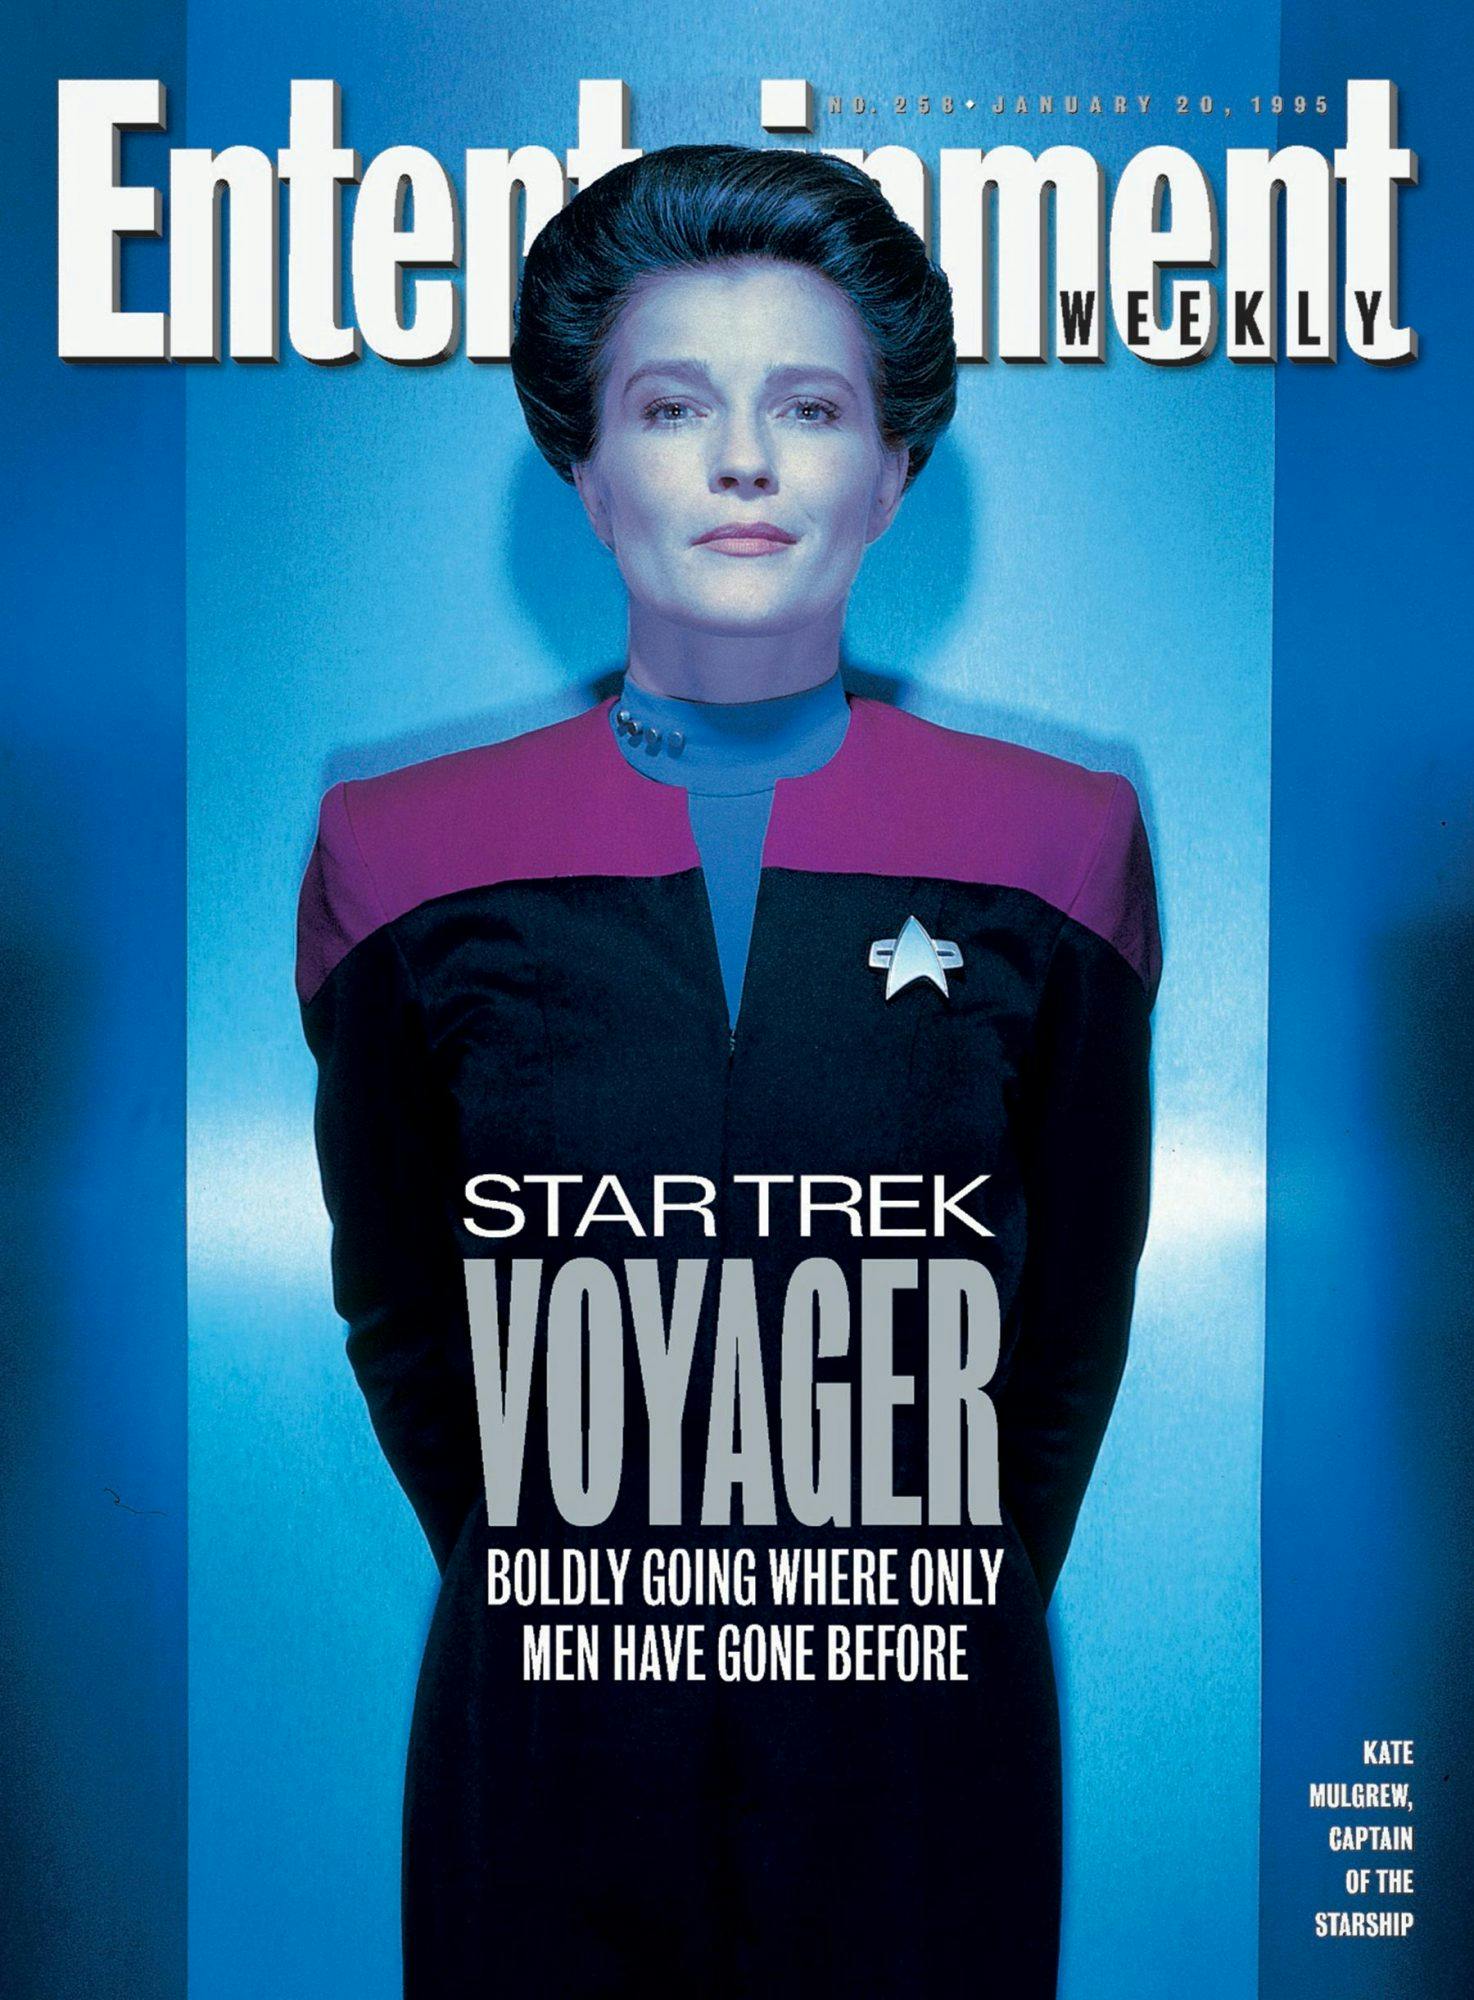 Kate Mulgrew (Star Trek: Voyager's Captain Janeway) graces the January 20, 1995 cover of Entertainment Weekly